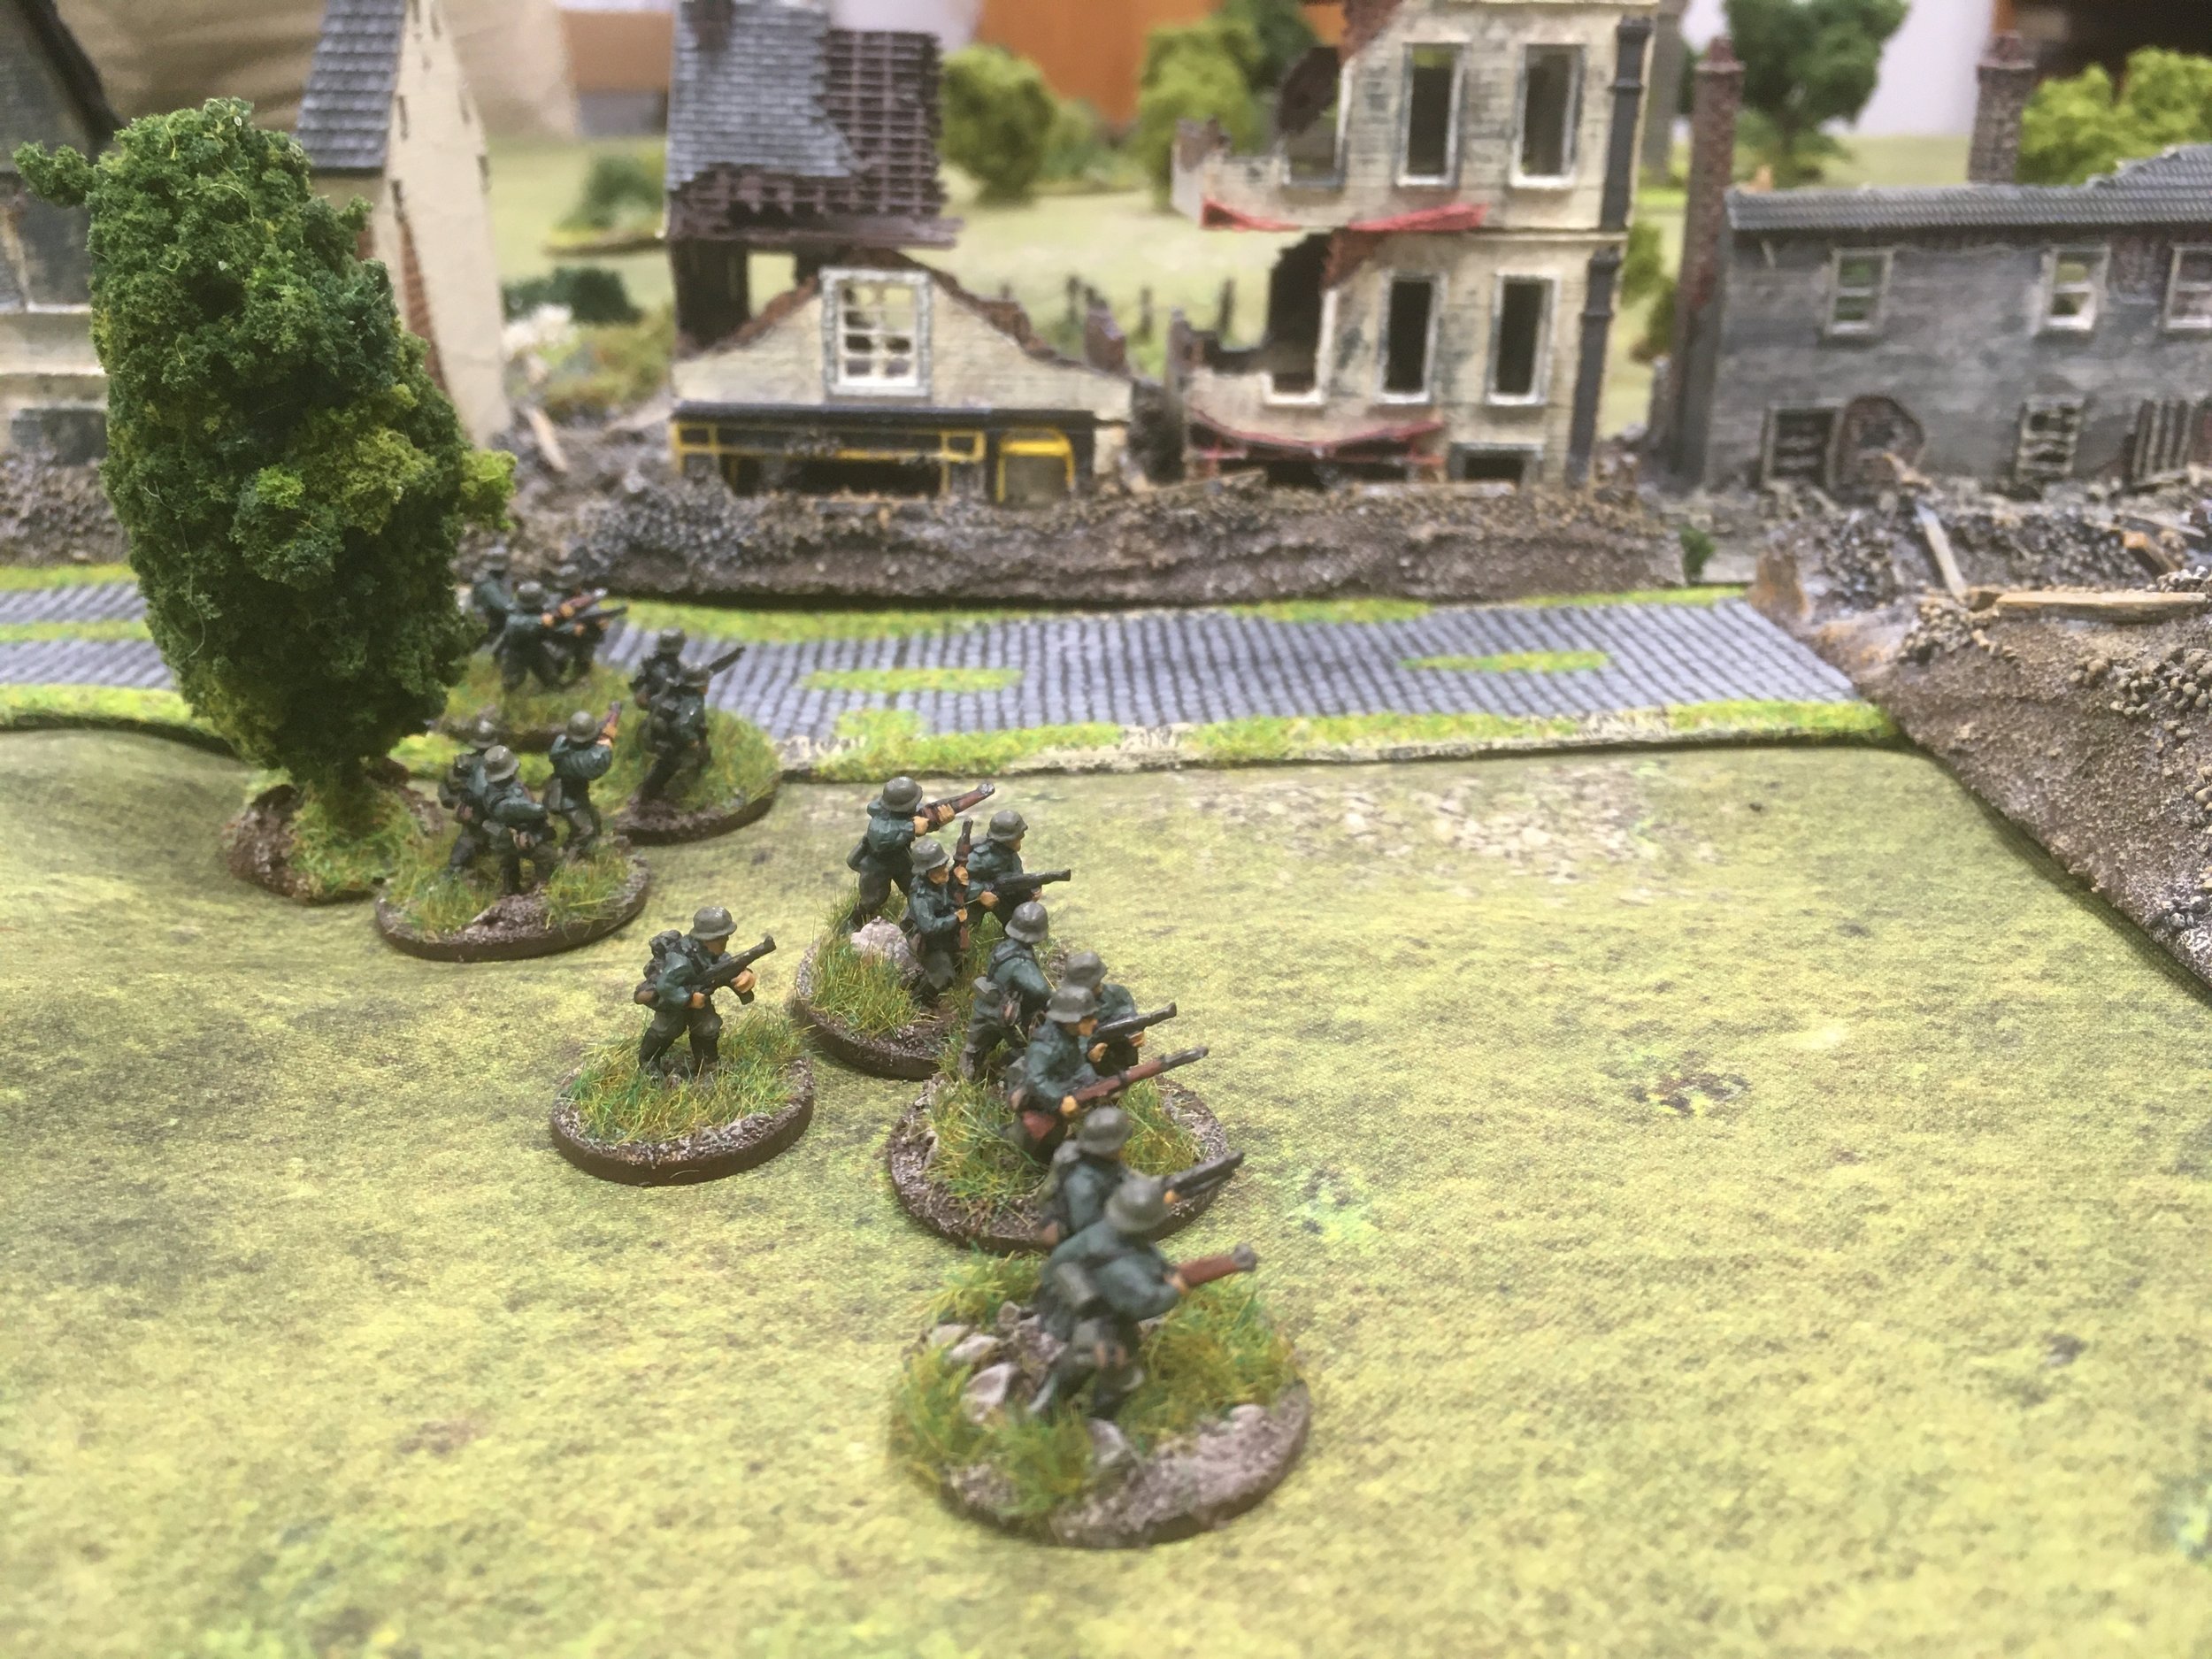 Bravely the dismounted motorcycle platoon advanced towards the village...